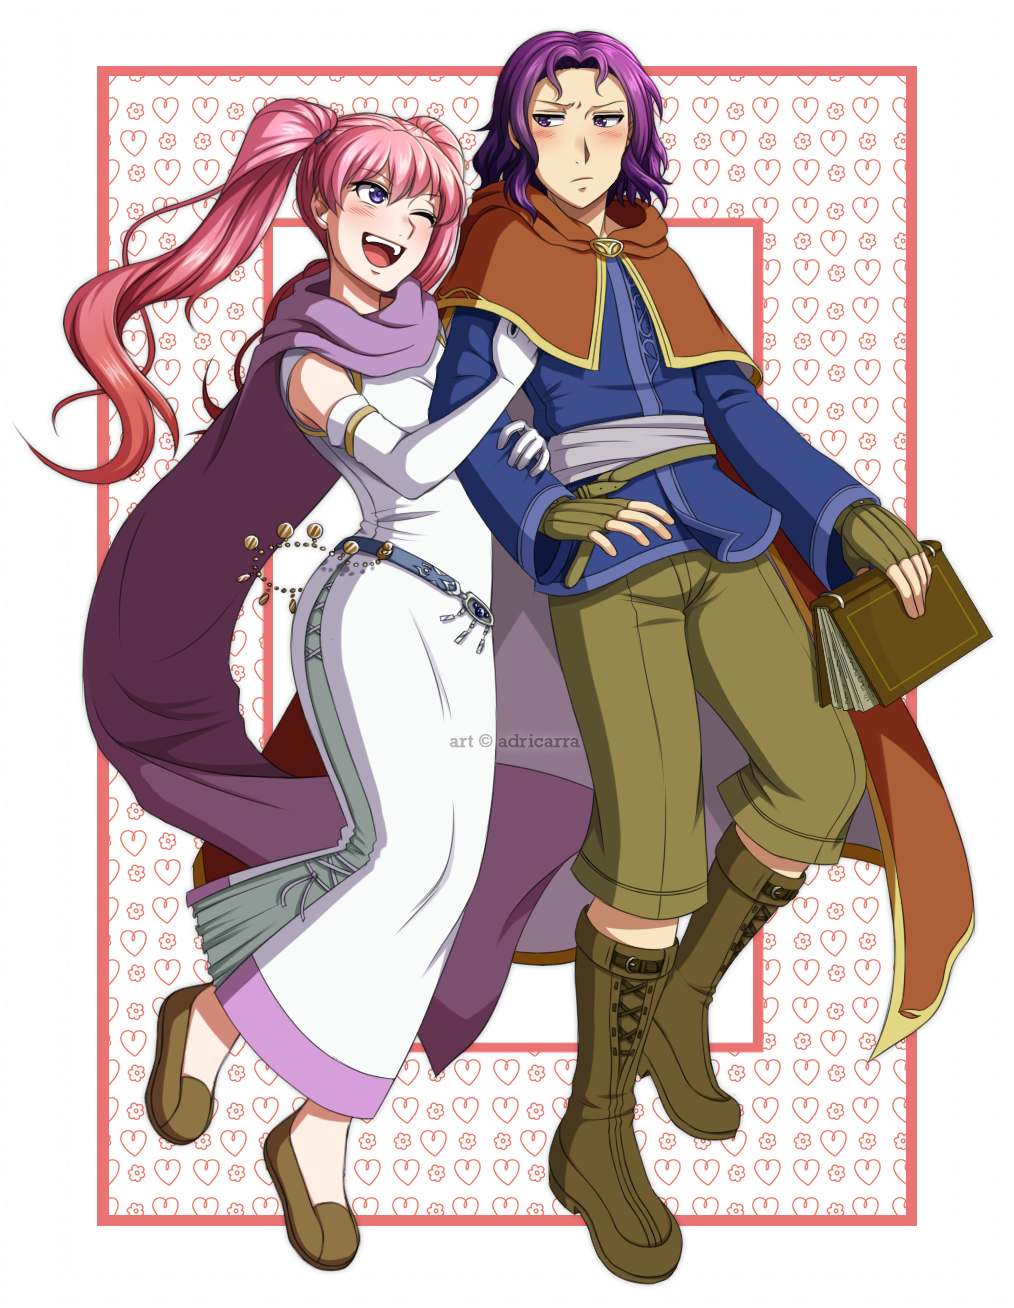 1boy 1girl adricarra arm_grab belt blush book boots cape cross-laced_footwear dress elbow_gloves erk_(fire_emblem) fingerless_gloves fire_emblem fire_emblem:_rekka_no_ken gloves heart heart_background highres locked_arms long_hair long_sleeves looking_at_another one_eye_closed open_mouth pants pink_hair purple_hair robe scarf serra shoes short_hair sleeveless smile twintails violet_eyes white_dress white_gloves